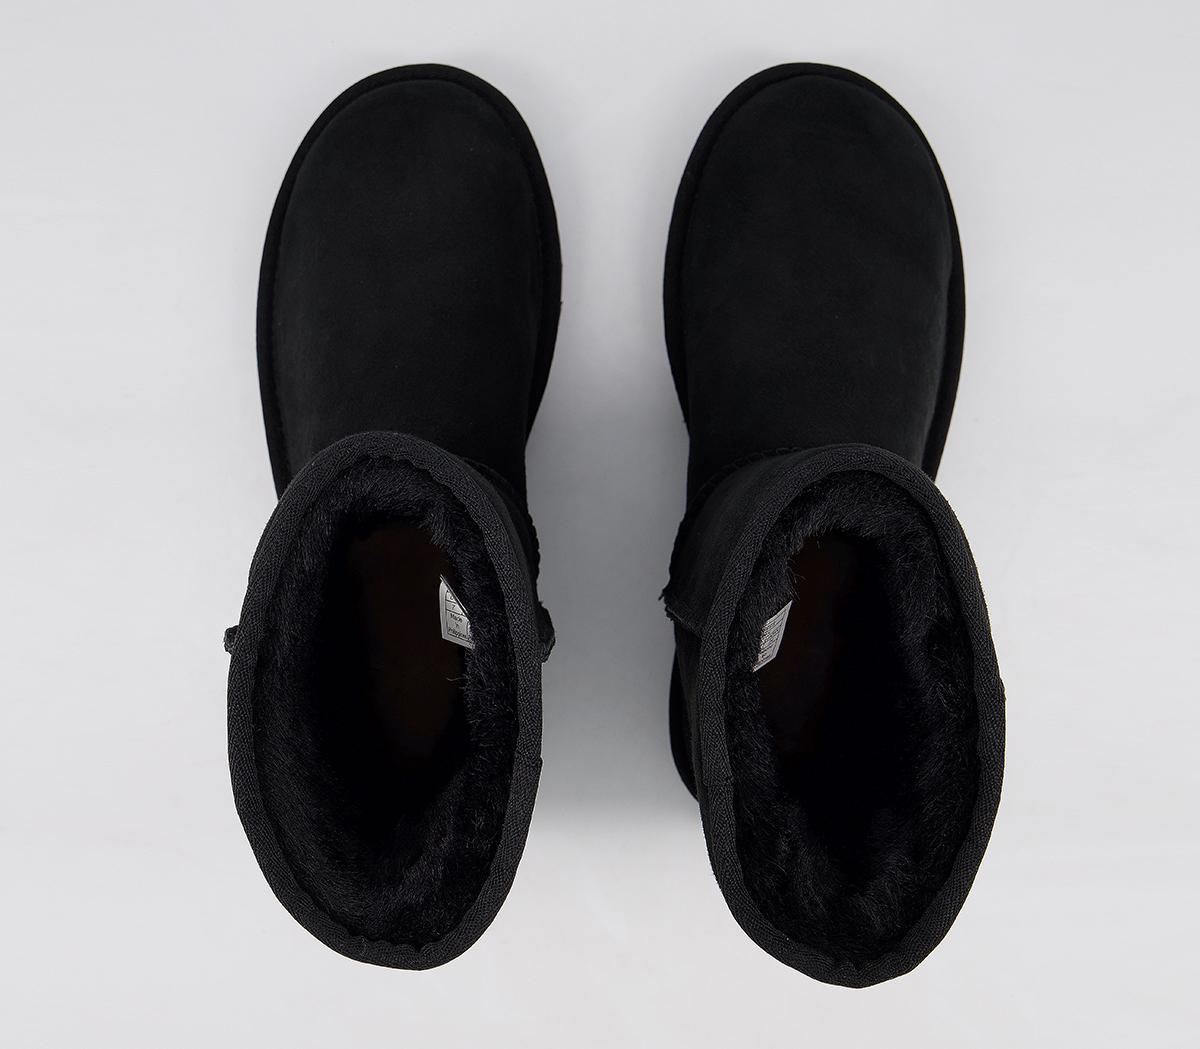 UGG Classic Short II Boots Black Suede - Ankle Boots